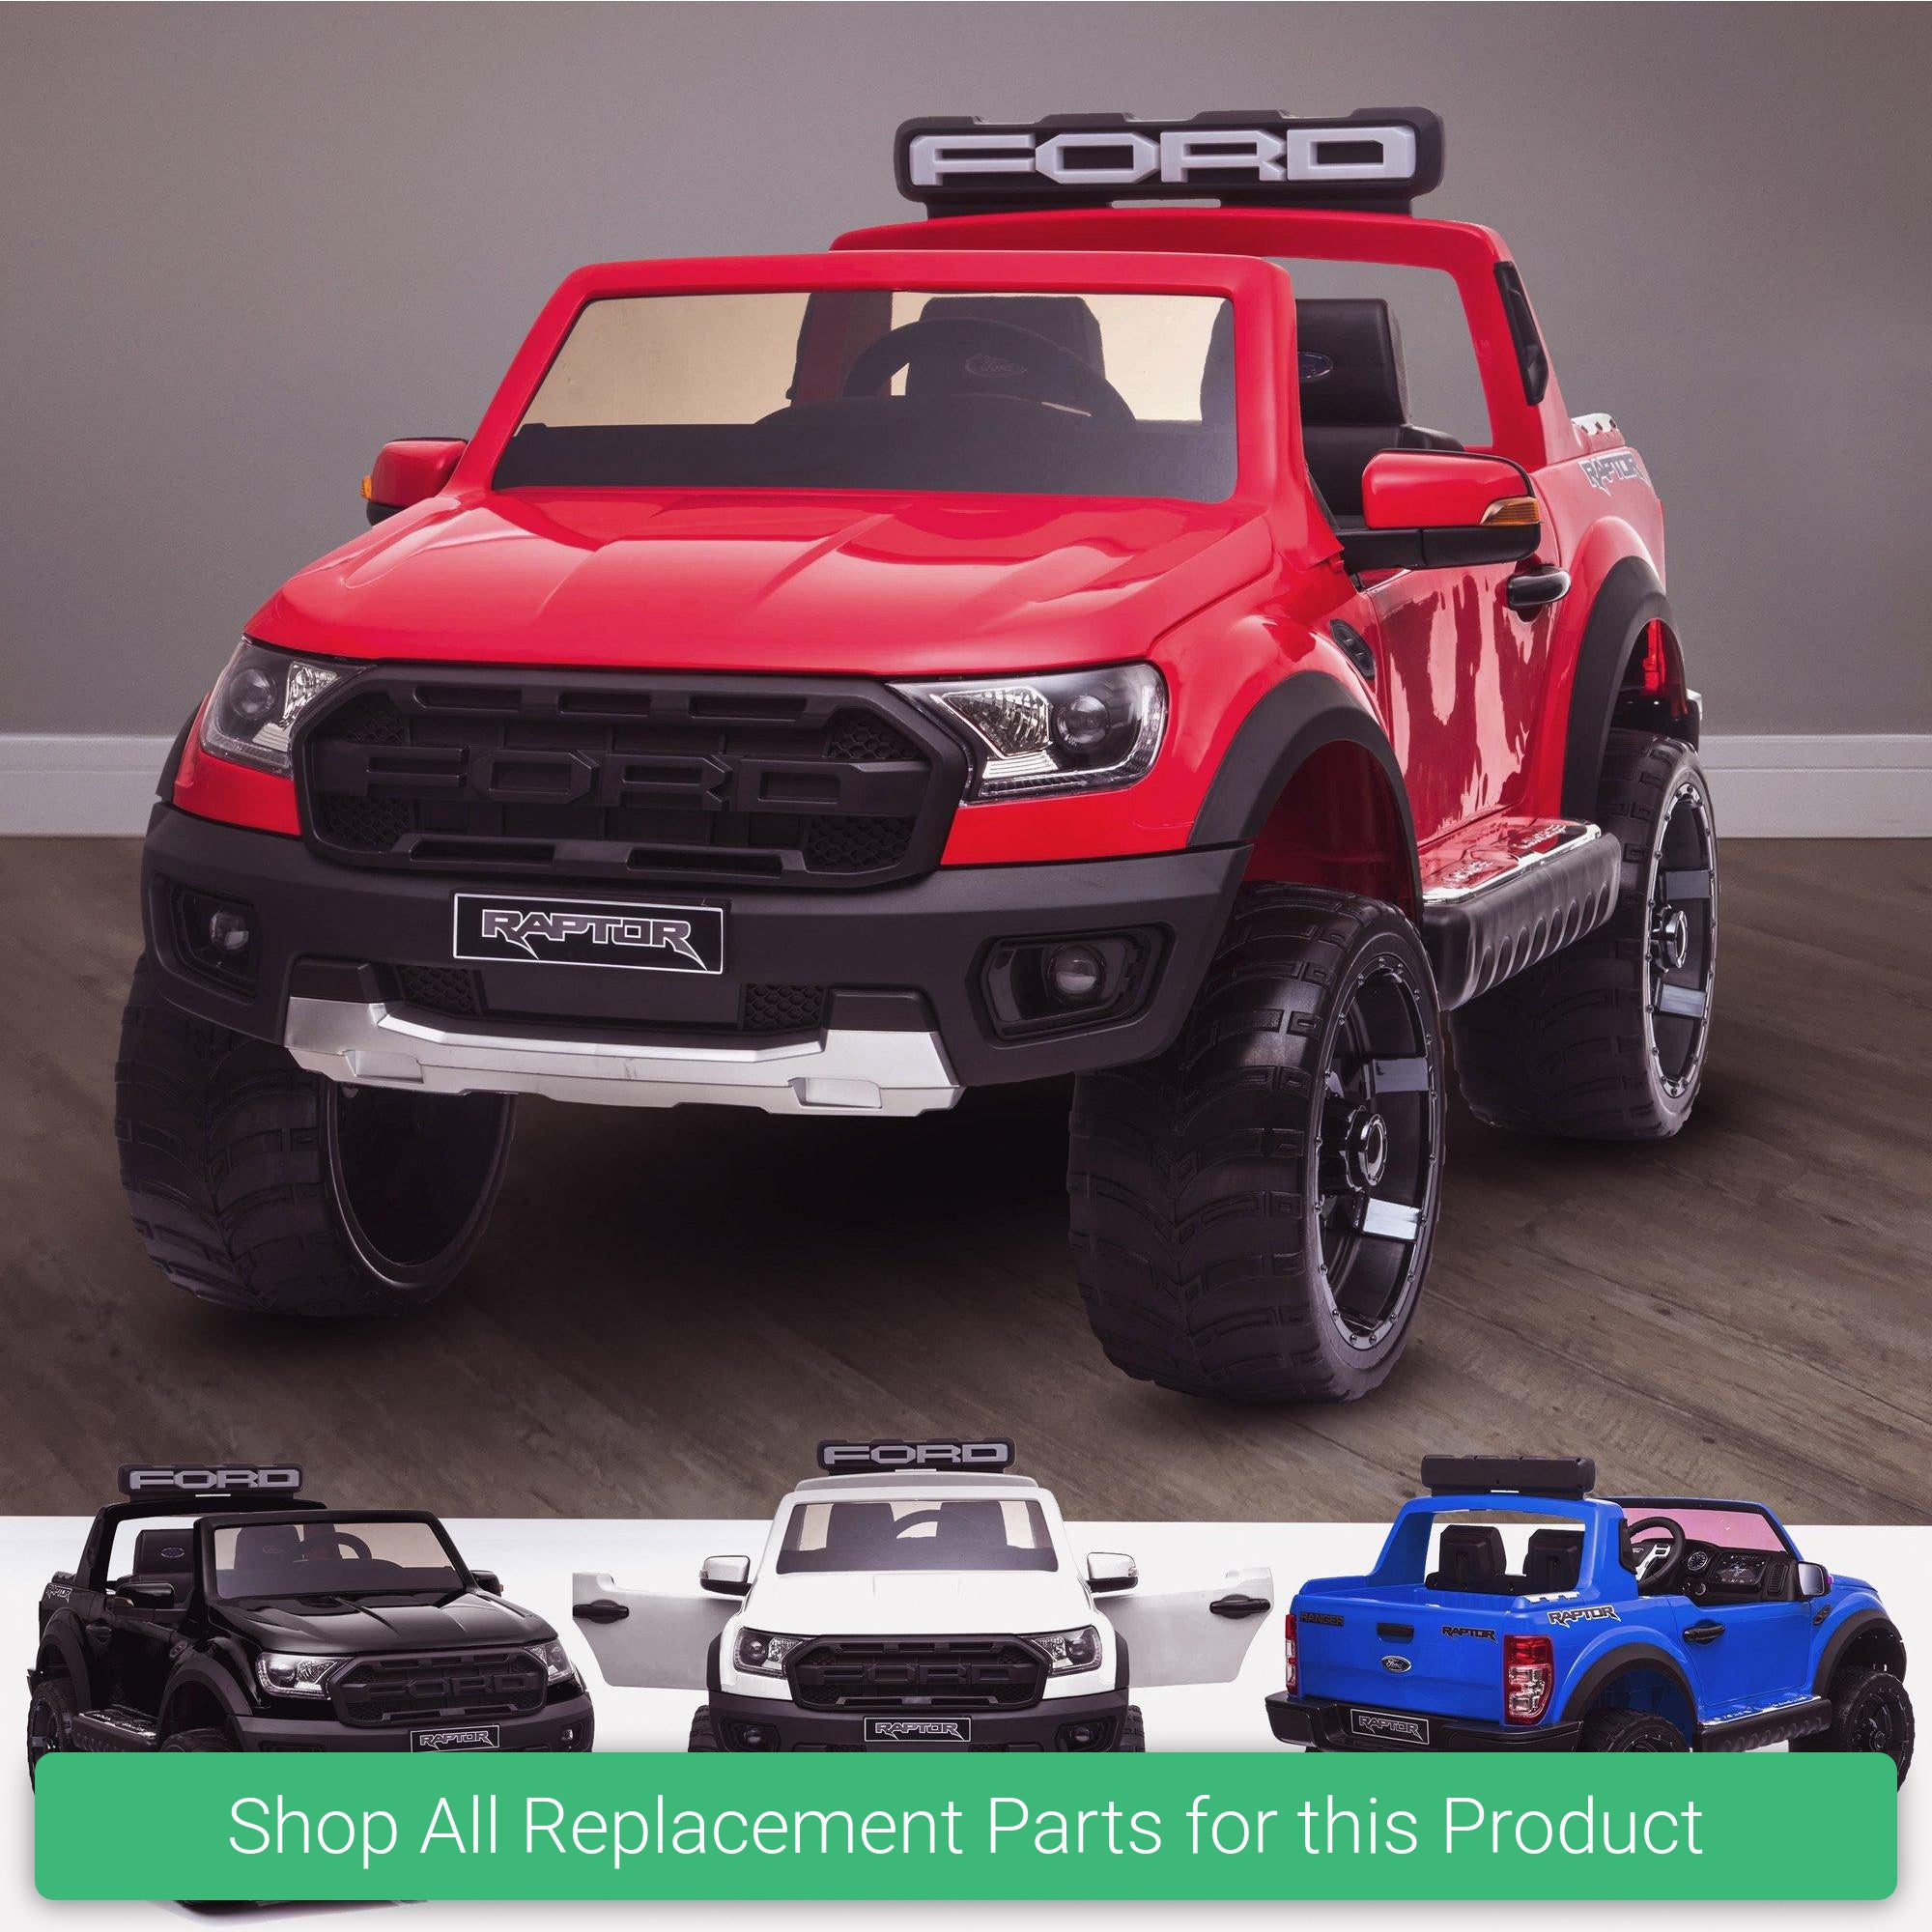 Replacement Parts and Spares for Kids Ford Ranger Wildtrack Licensed  - RANGER-VARI - DK-F150R